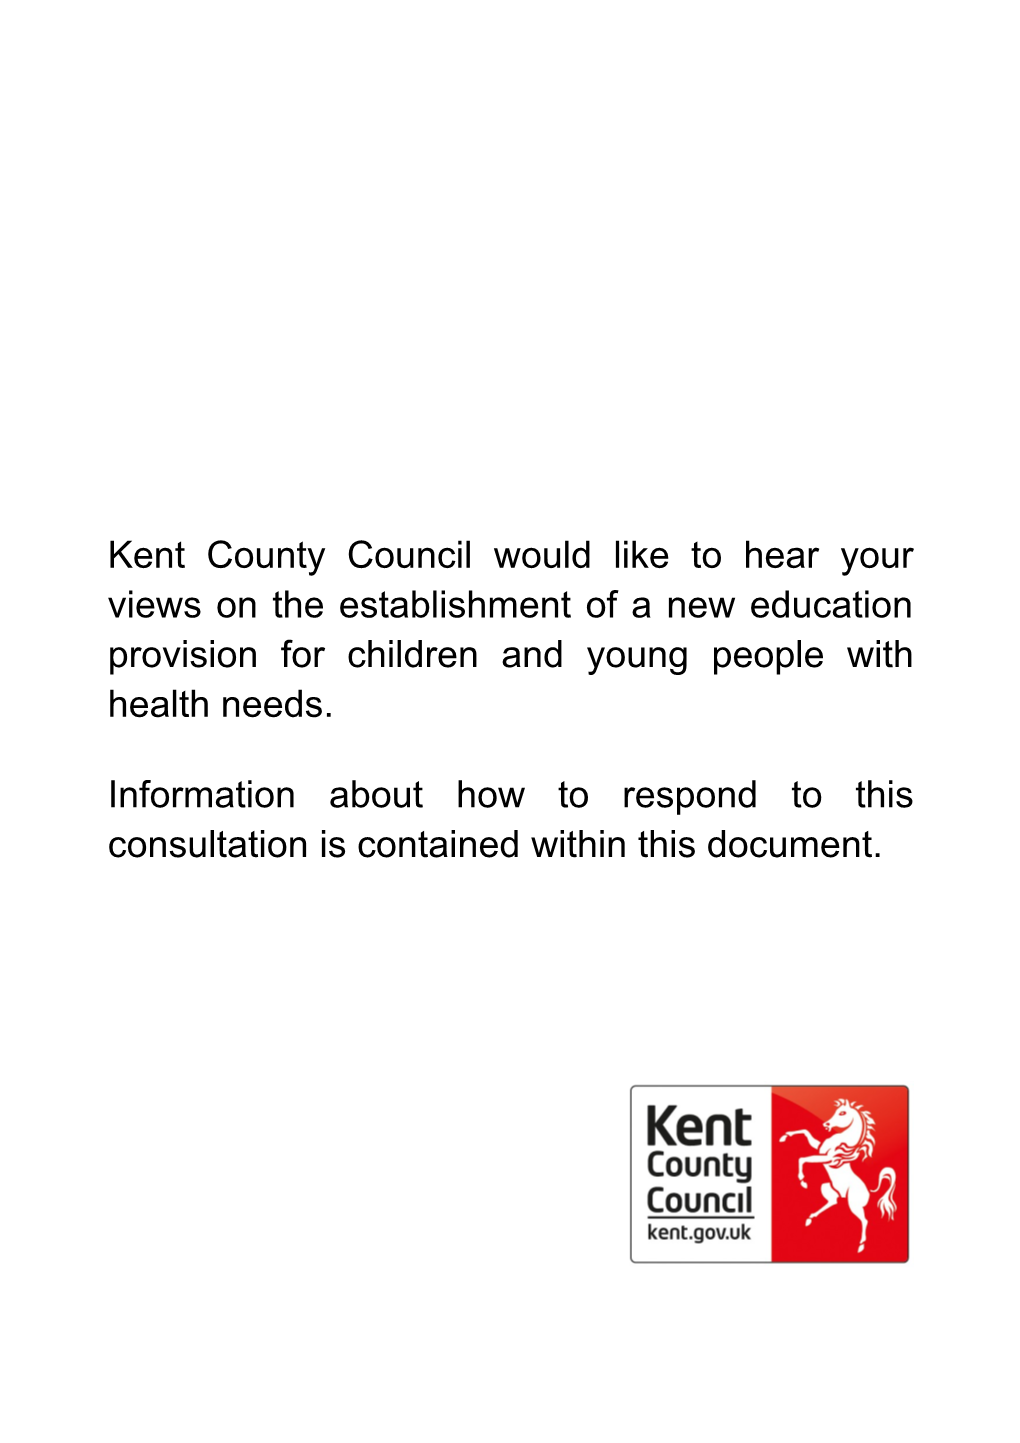 Information About How to Respond to This Consultation Is Contained Within This Document